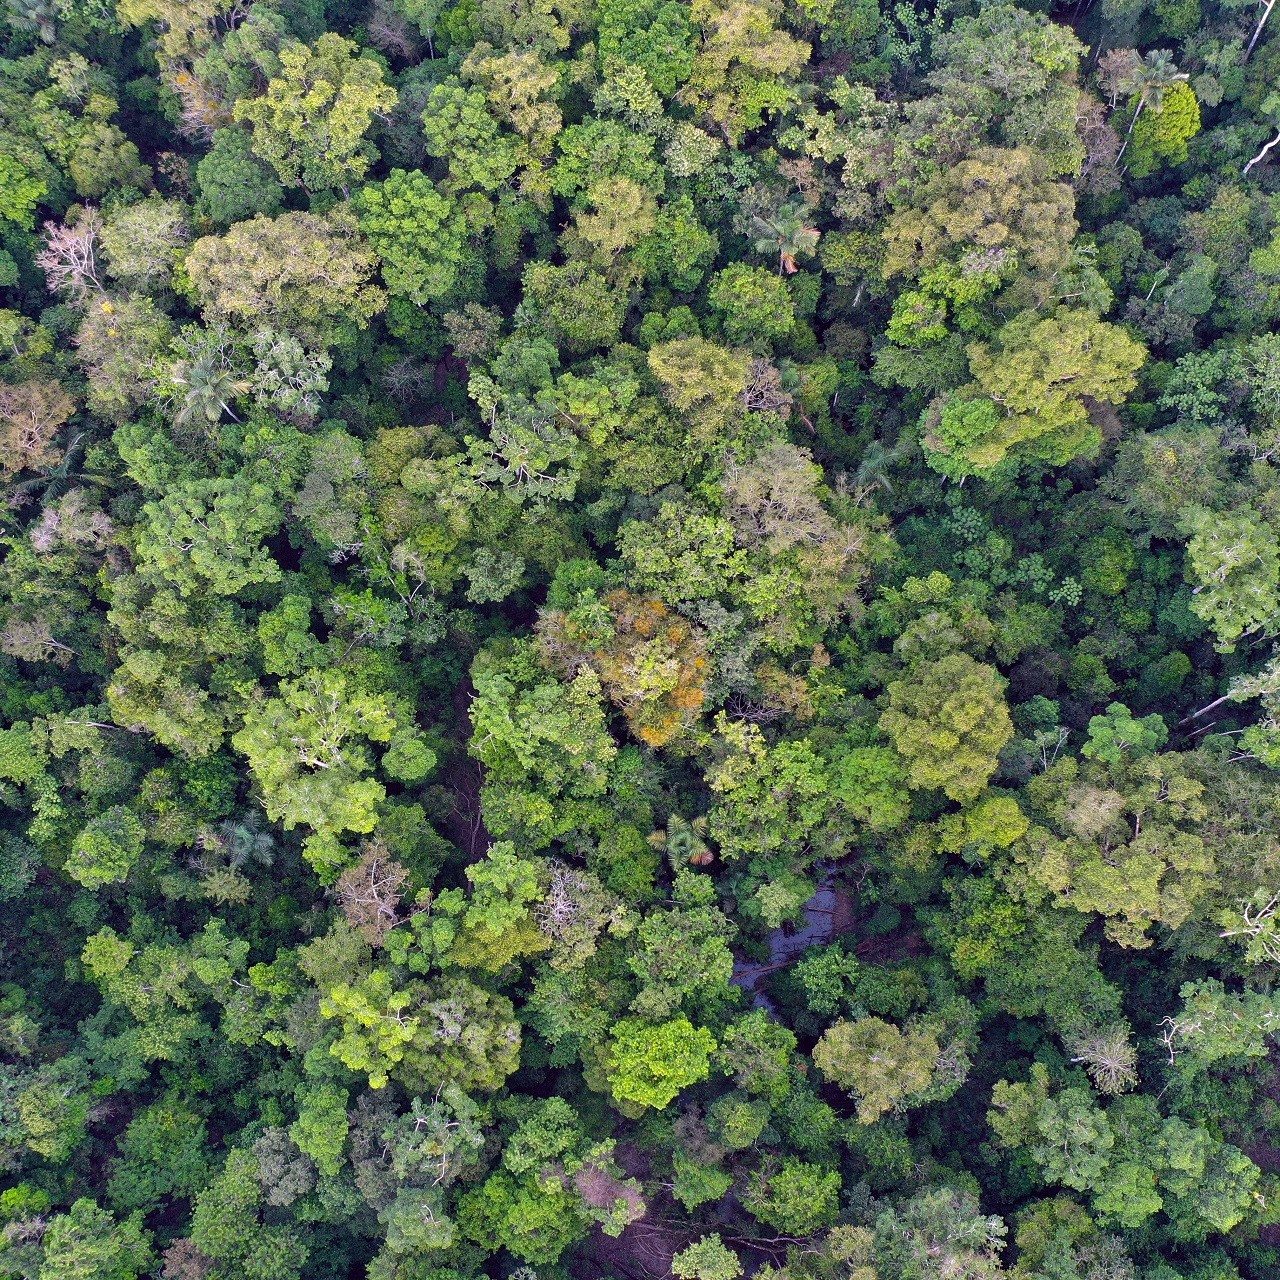 Birds eye view of a forest - Getty Images